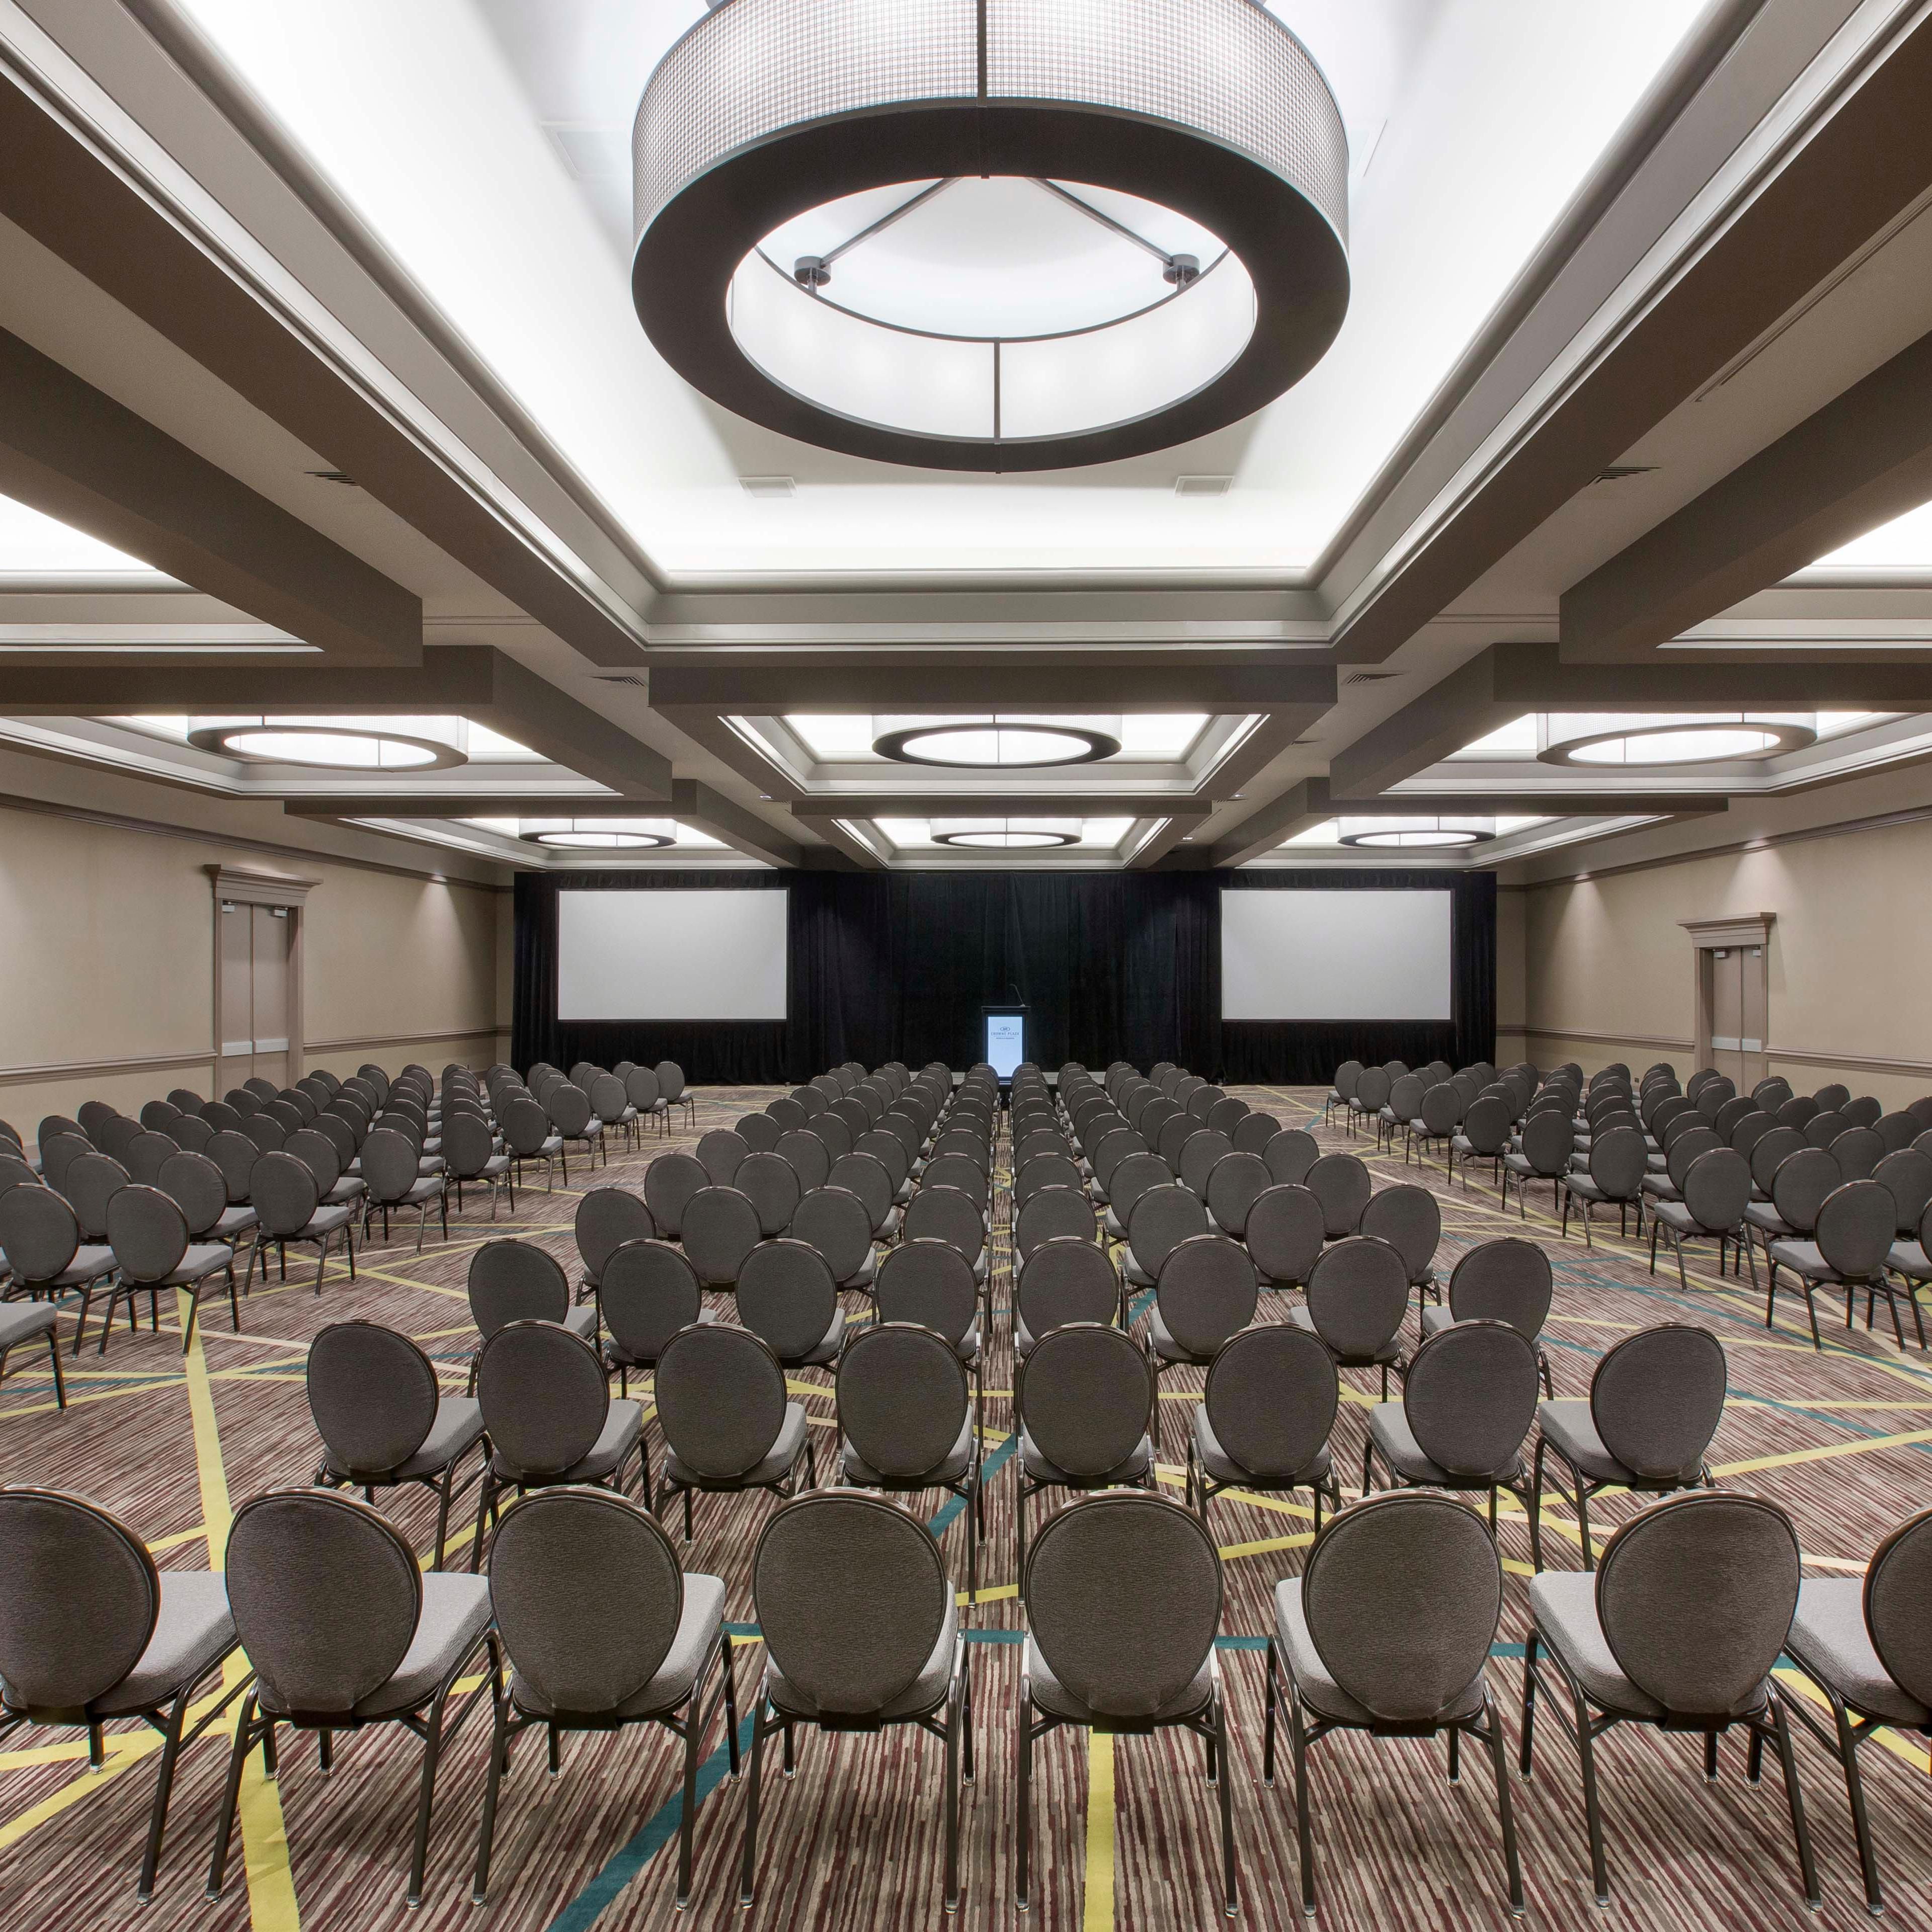 At 6,120 sq ft, Georgia Ballroom is the largest meeting room.